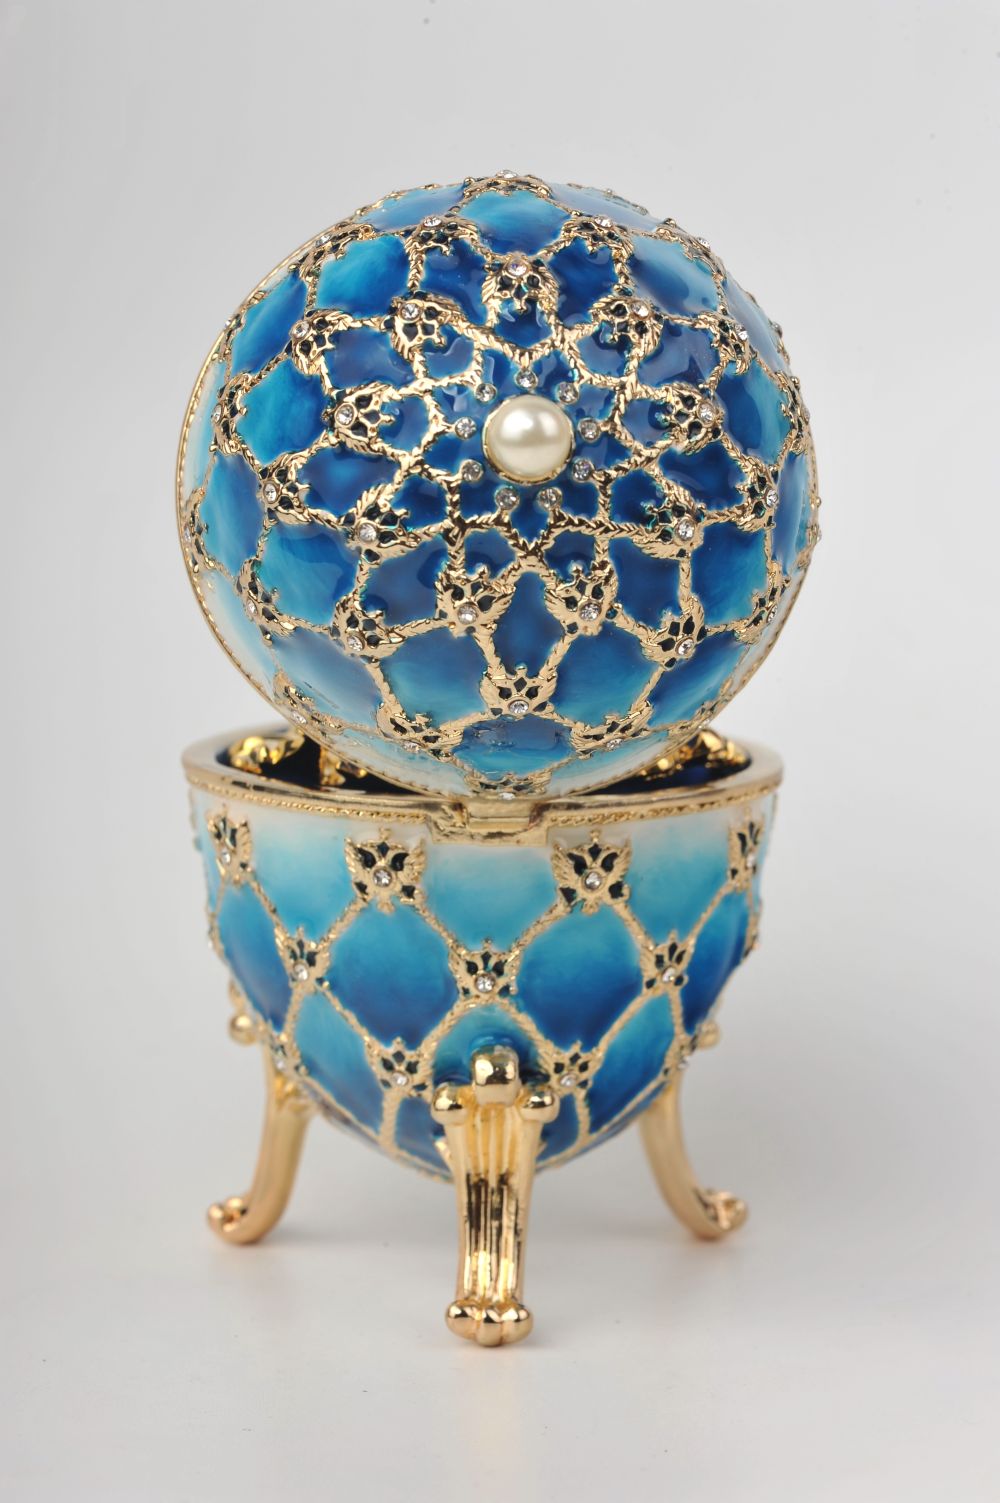 Blue Faberge Egg with Gold Clock